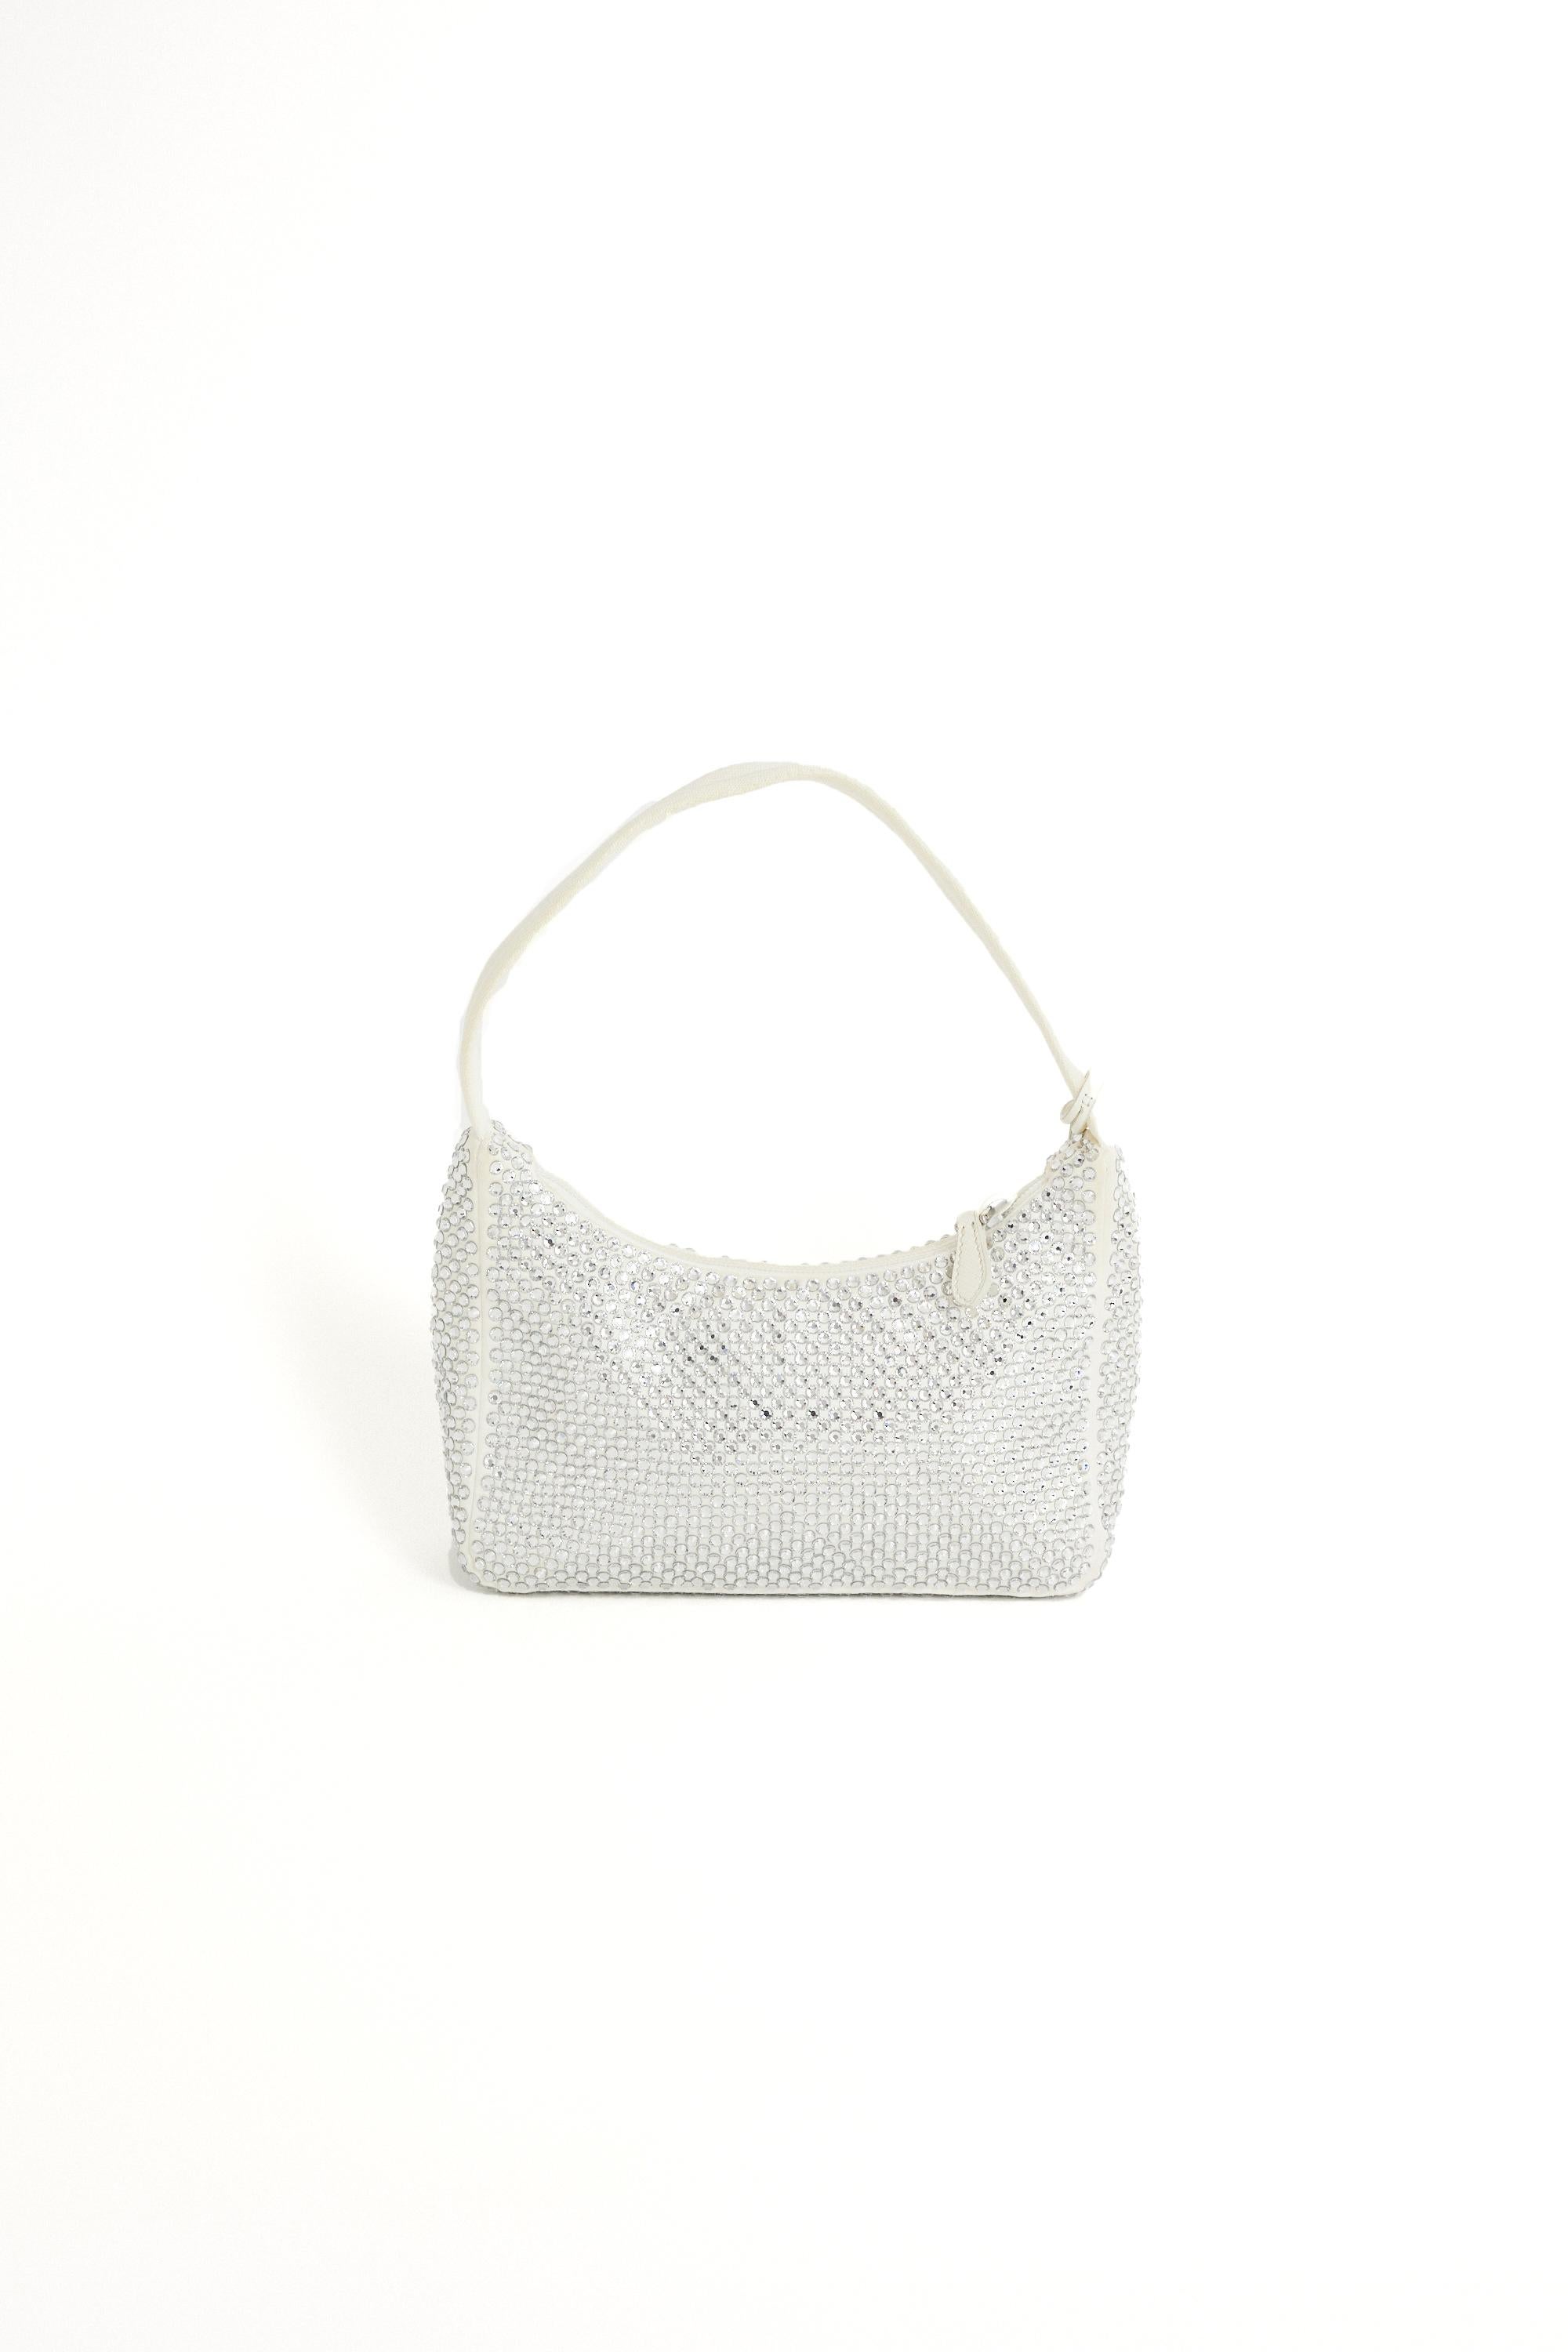 Prada 2005 re-edition crystalised hobo bag. Features Prada hardware, all over crystals and zip closure. Pre-loved, in excellent condition.
Brand: Prada
Color: White
2005
Hobo Bag
Fabric: Fabric
Dustbag: Yes
Serial Number: 31 43
Measurements: Length: